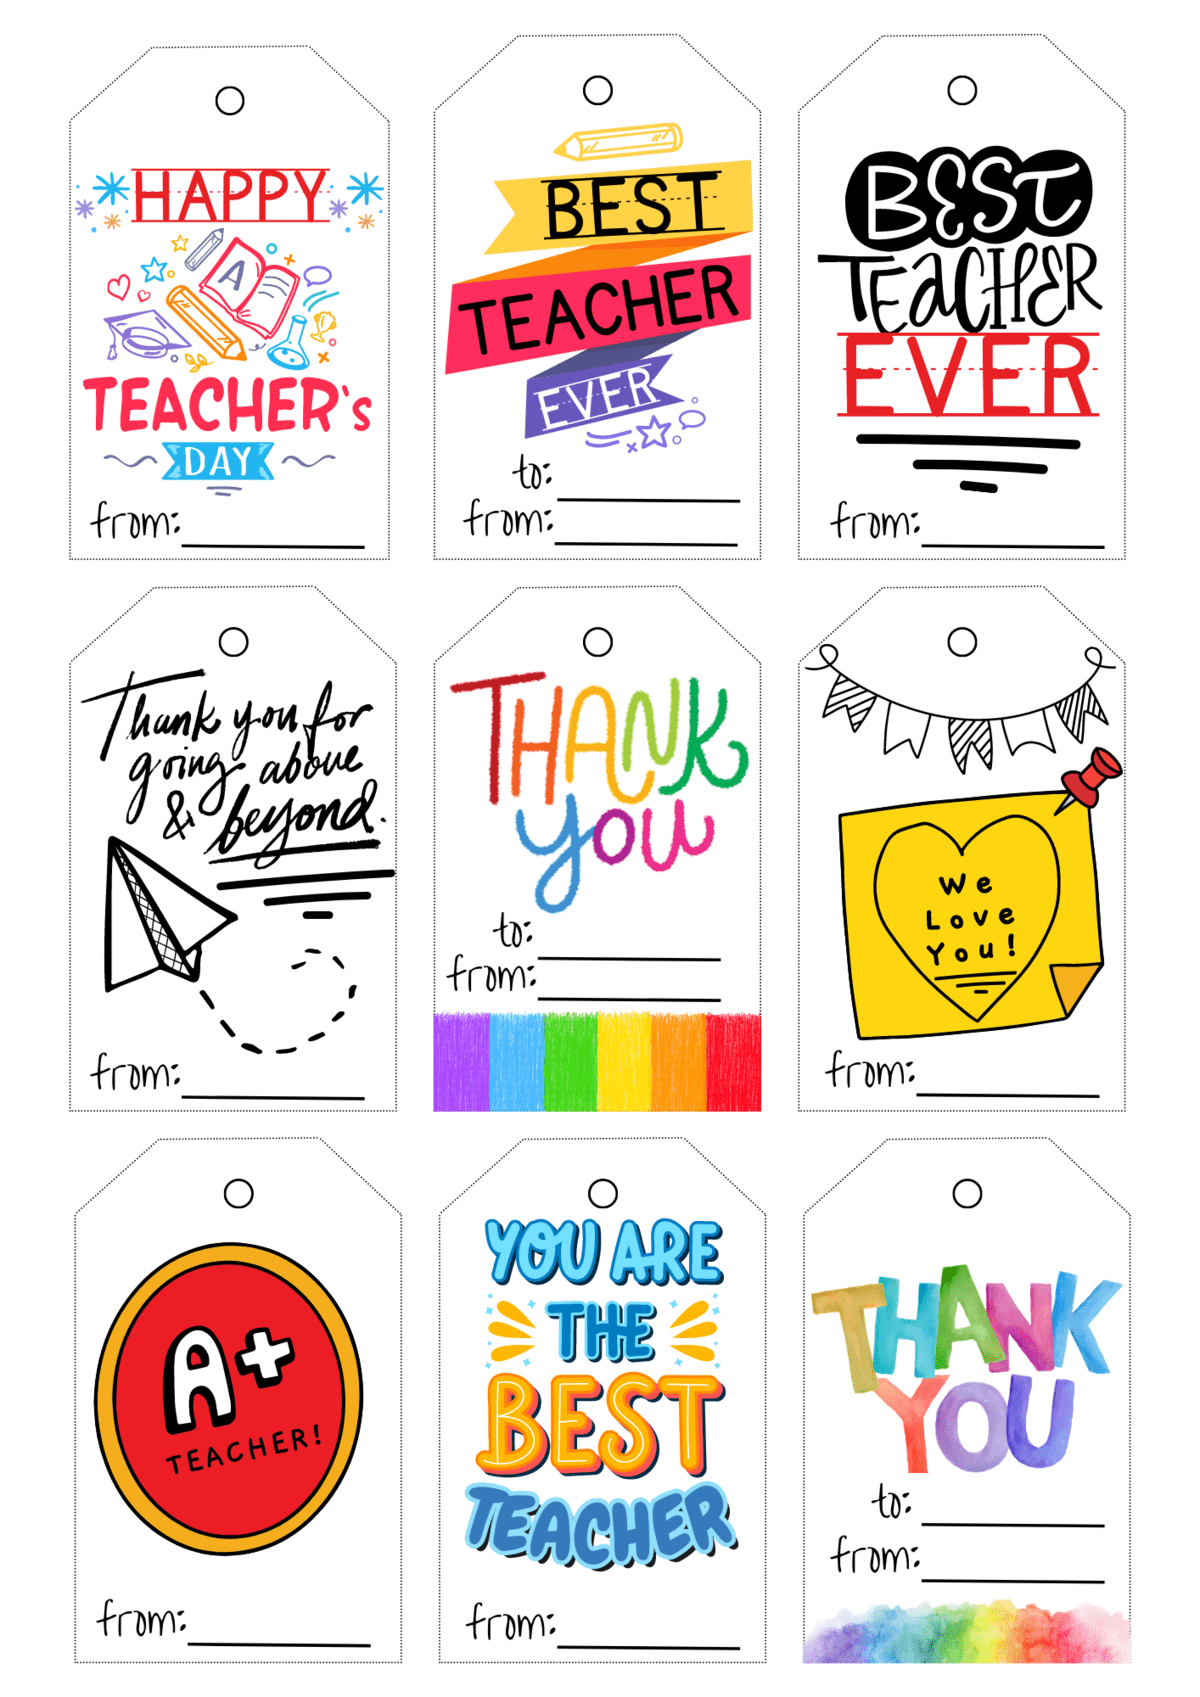 20 Free Printable Teacher Appreciation Tags - Prudent Penny Pincher